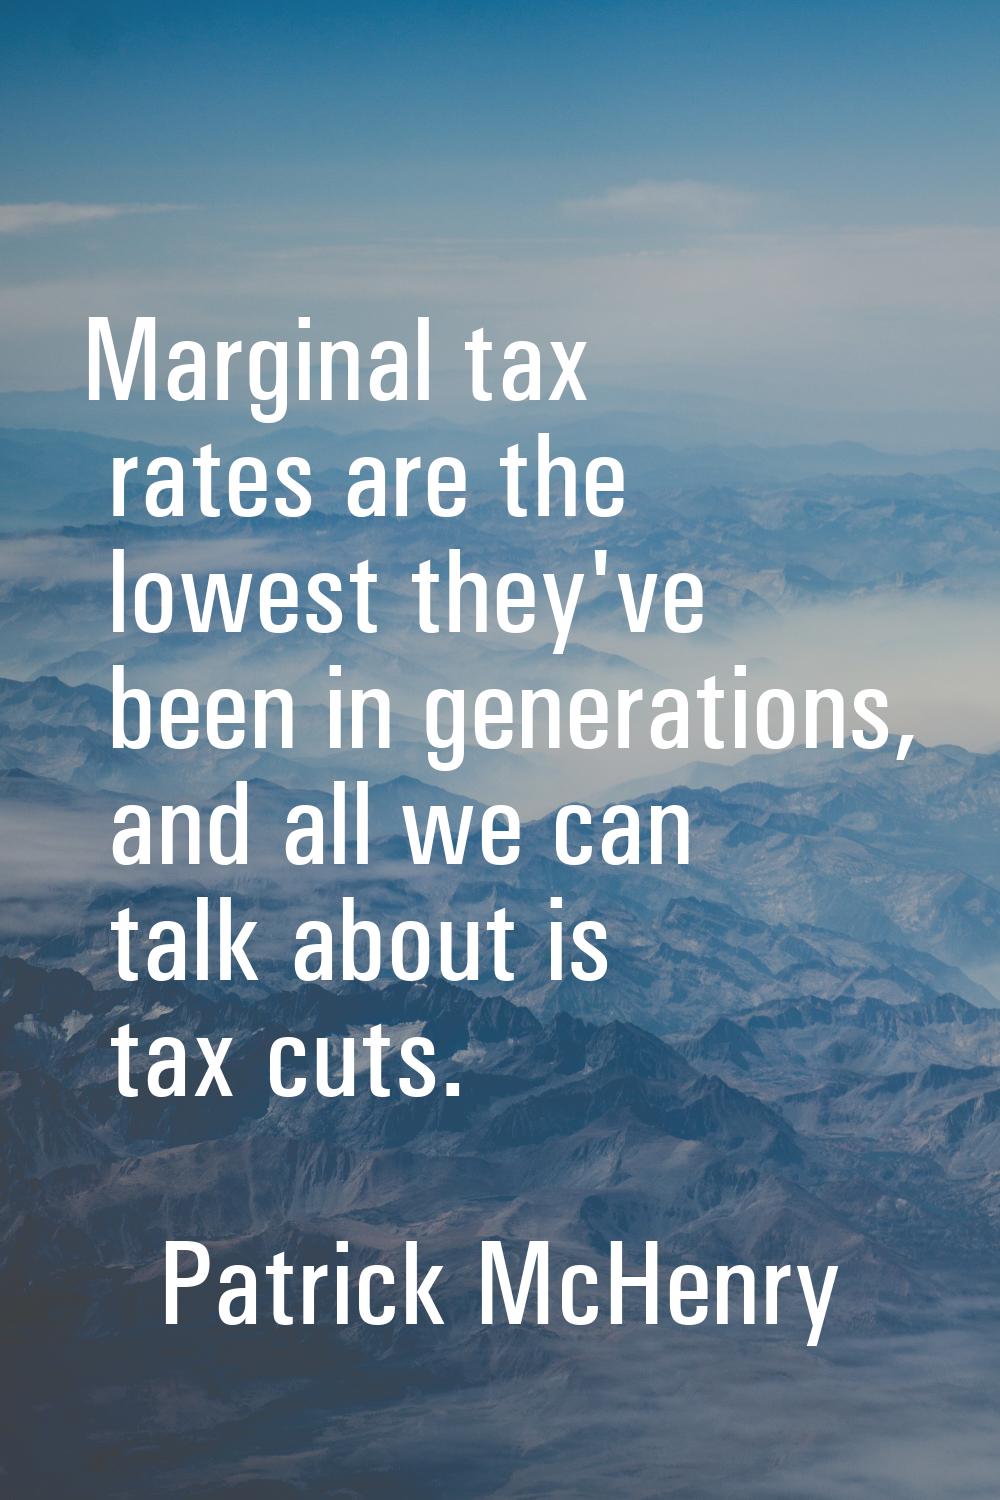 Marginal tax rates are the lowest they've been in generations, and all we can talk about is tax cut